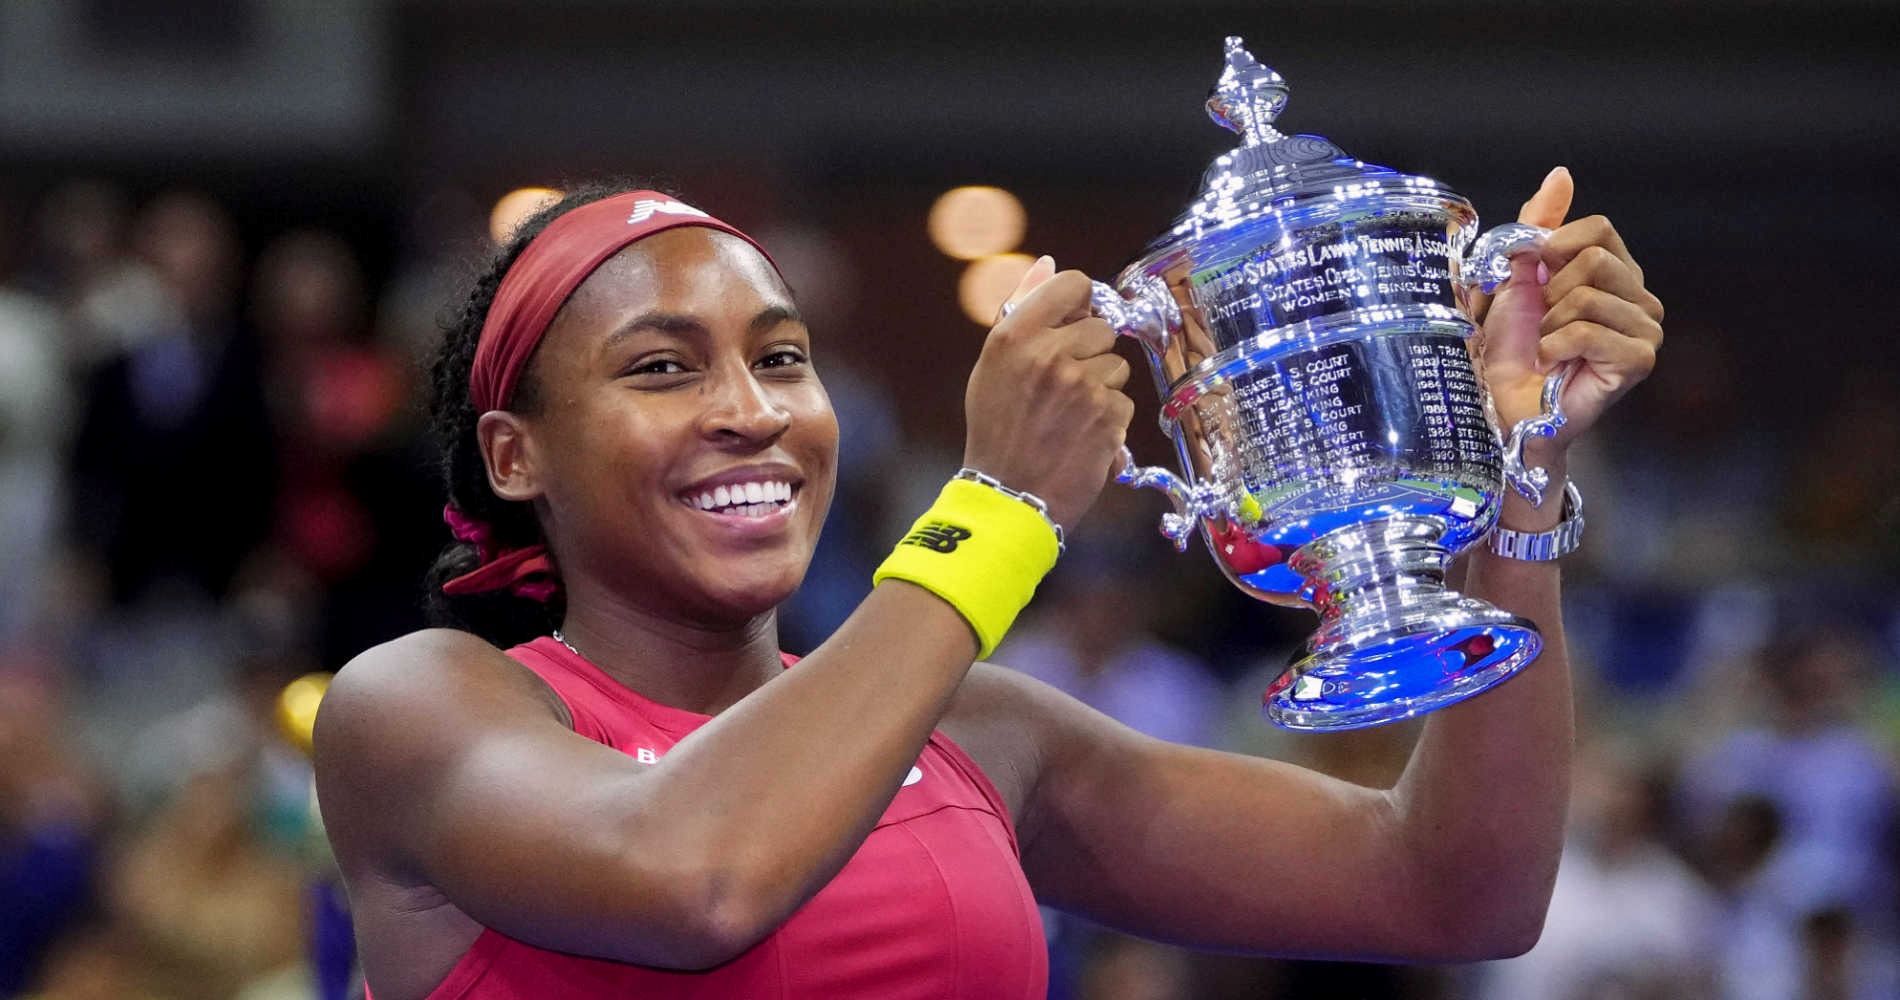 30-facts-about-coco-gauff